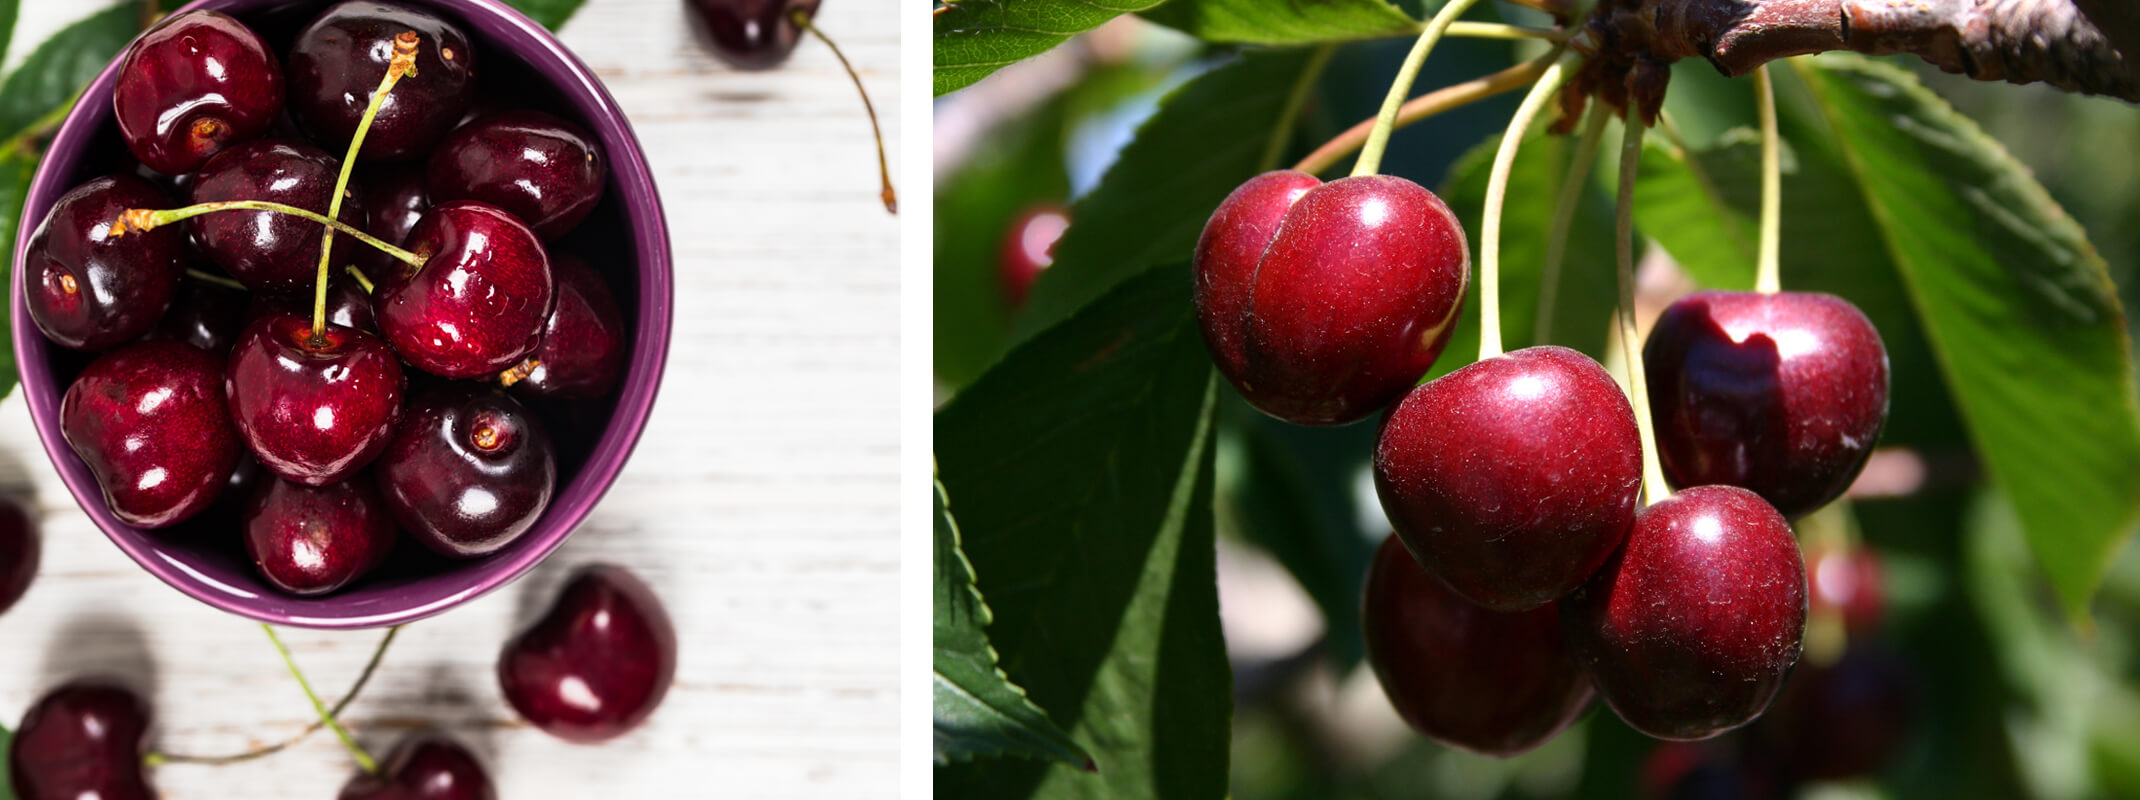 two images of cherries the first show bing cherries in a purple bowl the second shows ripe cherries hanging from a tree